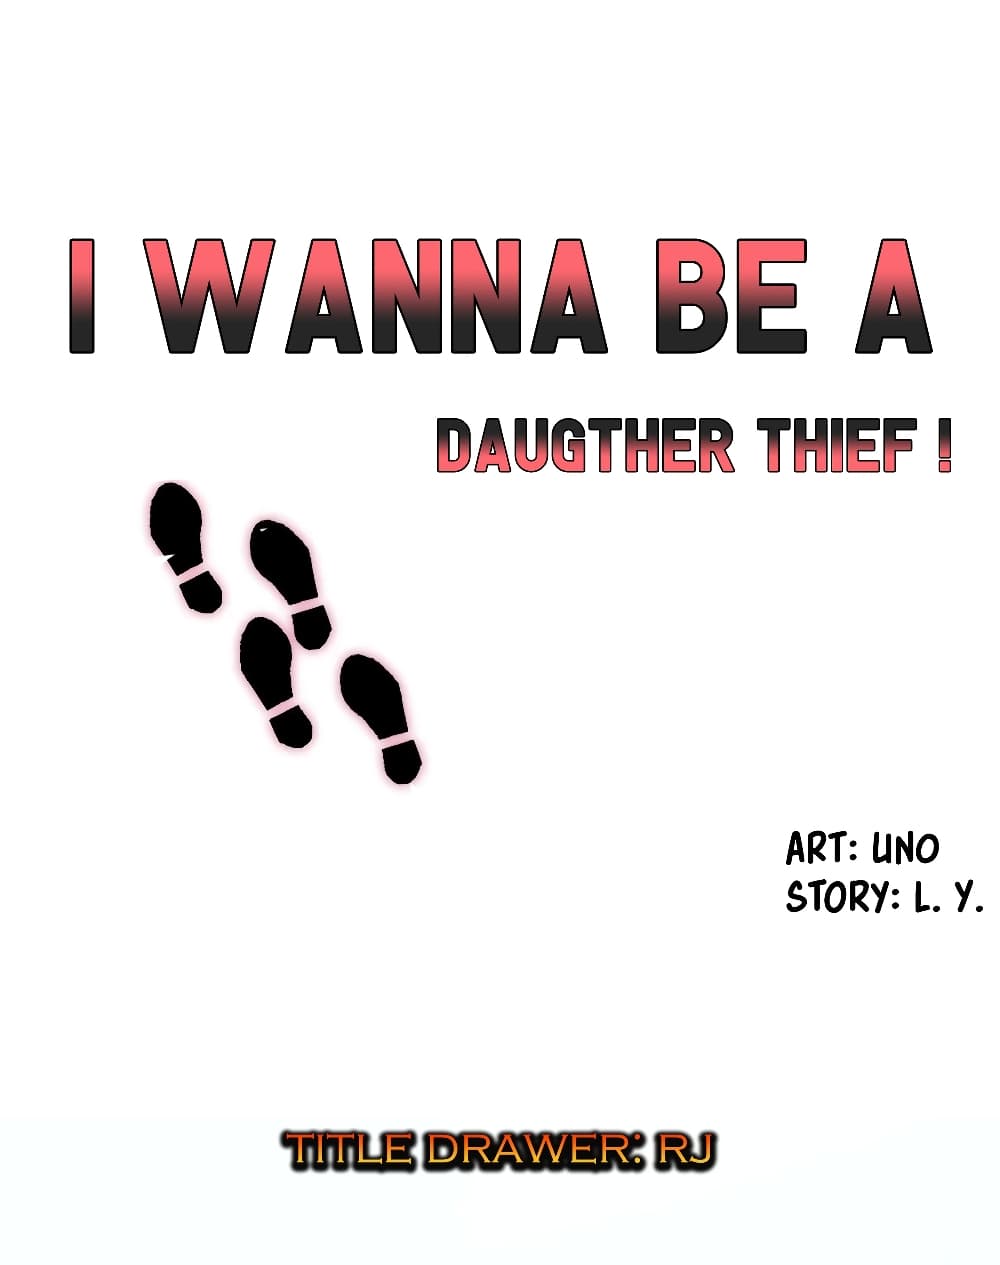 I Wanna Be a Daughter Thief 2 (1)